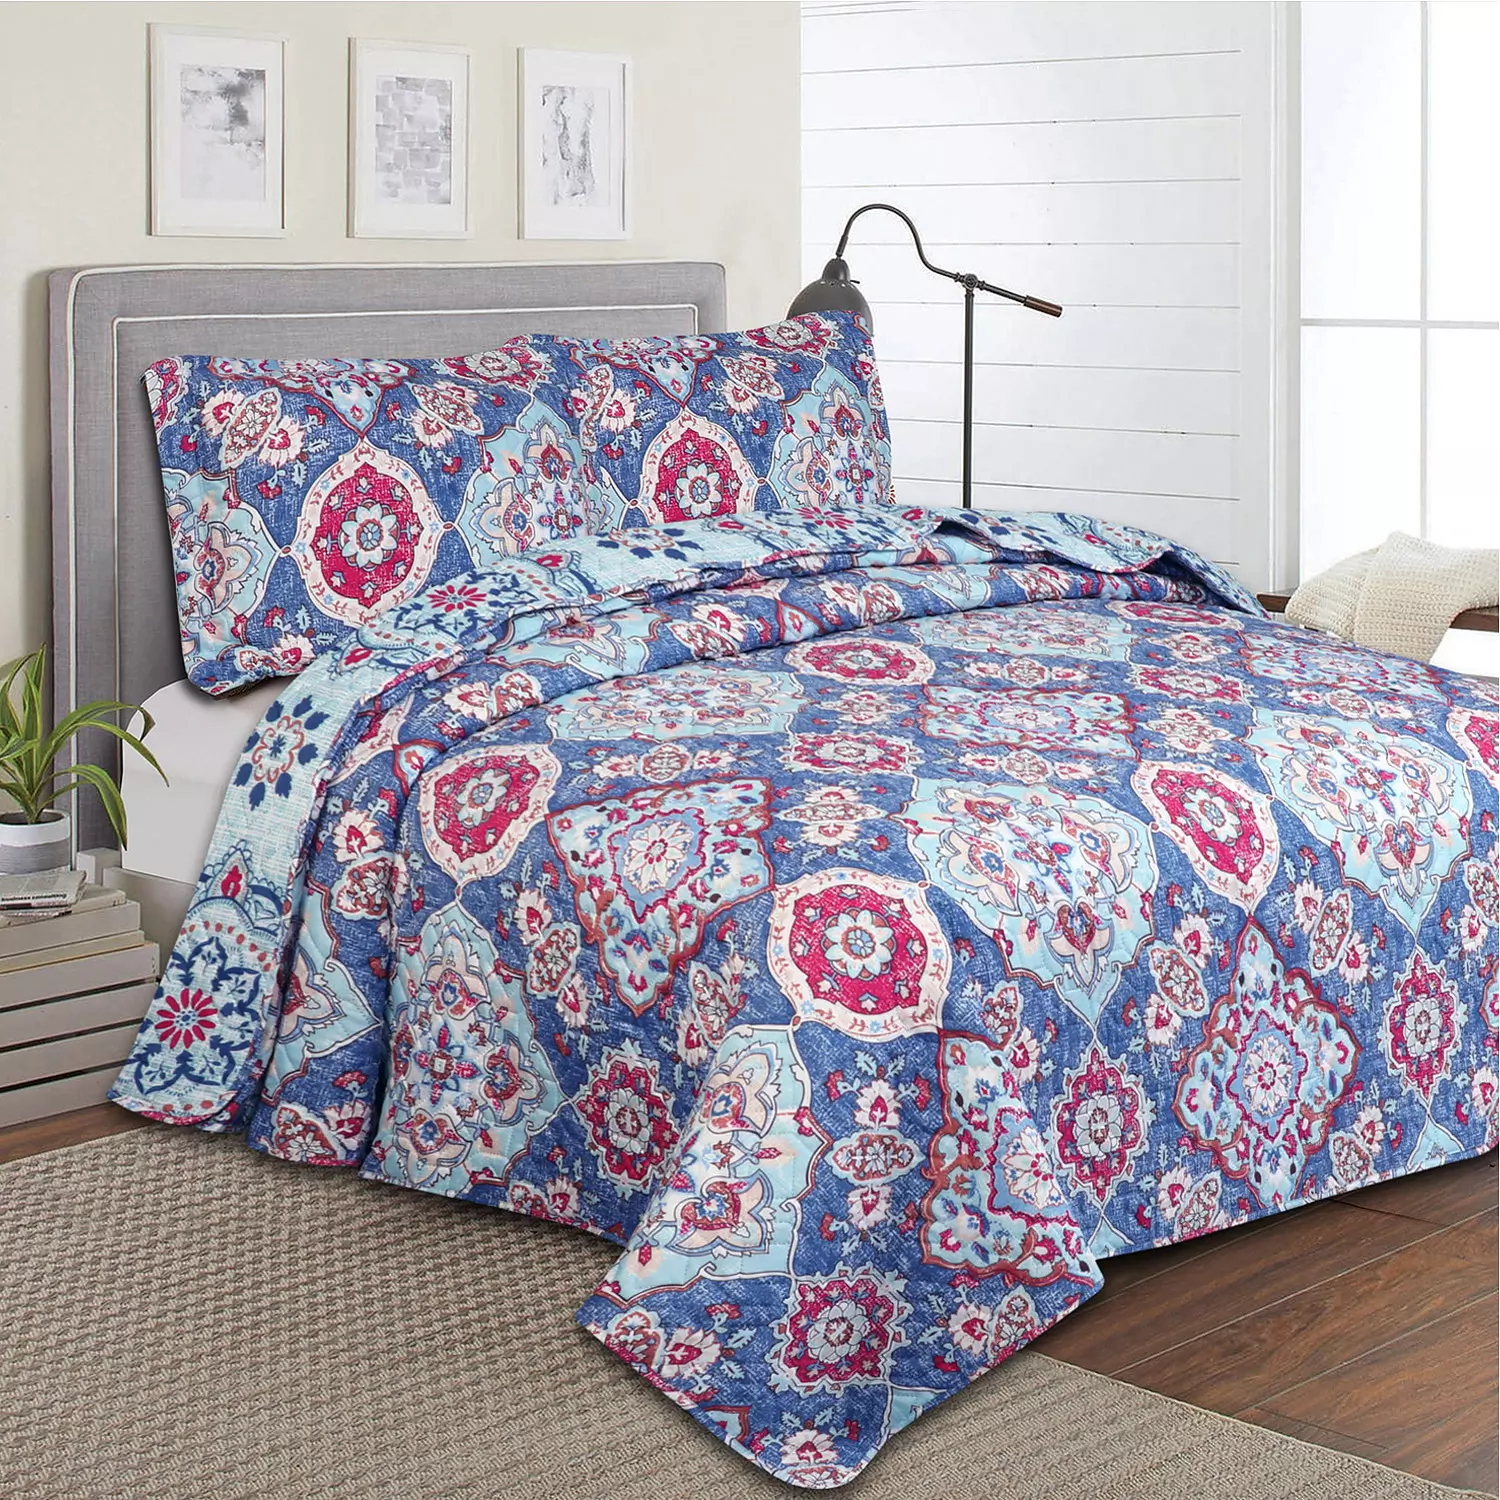 Blue with pink medallion print quilt set, double-queen